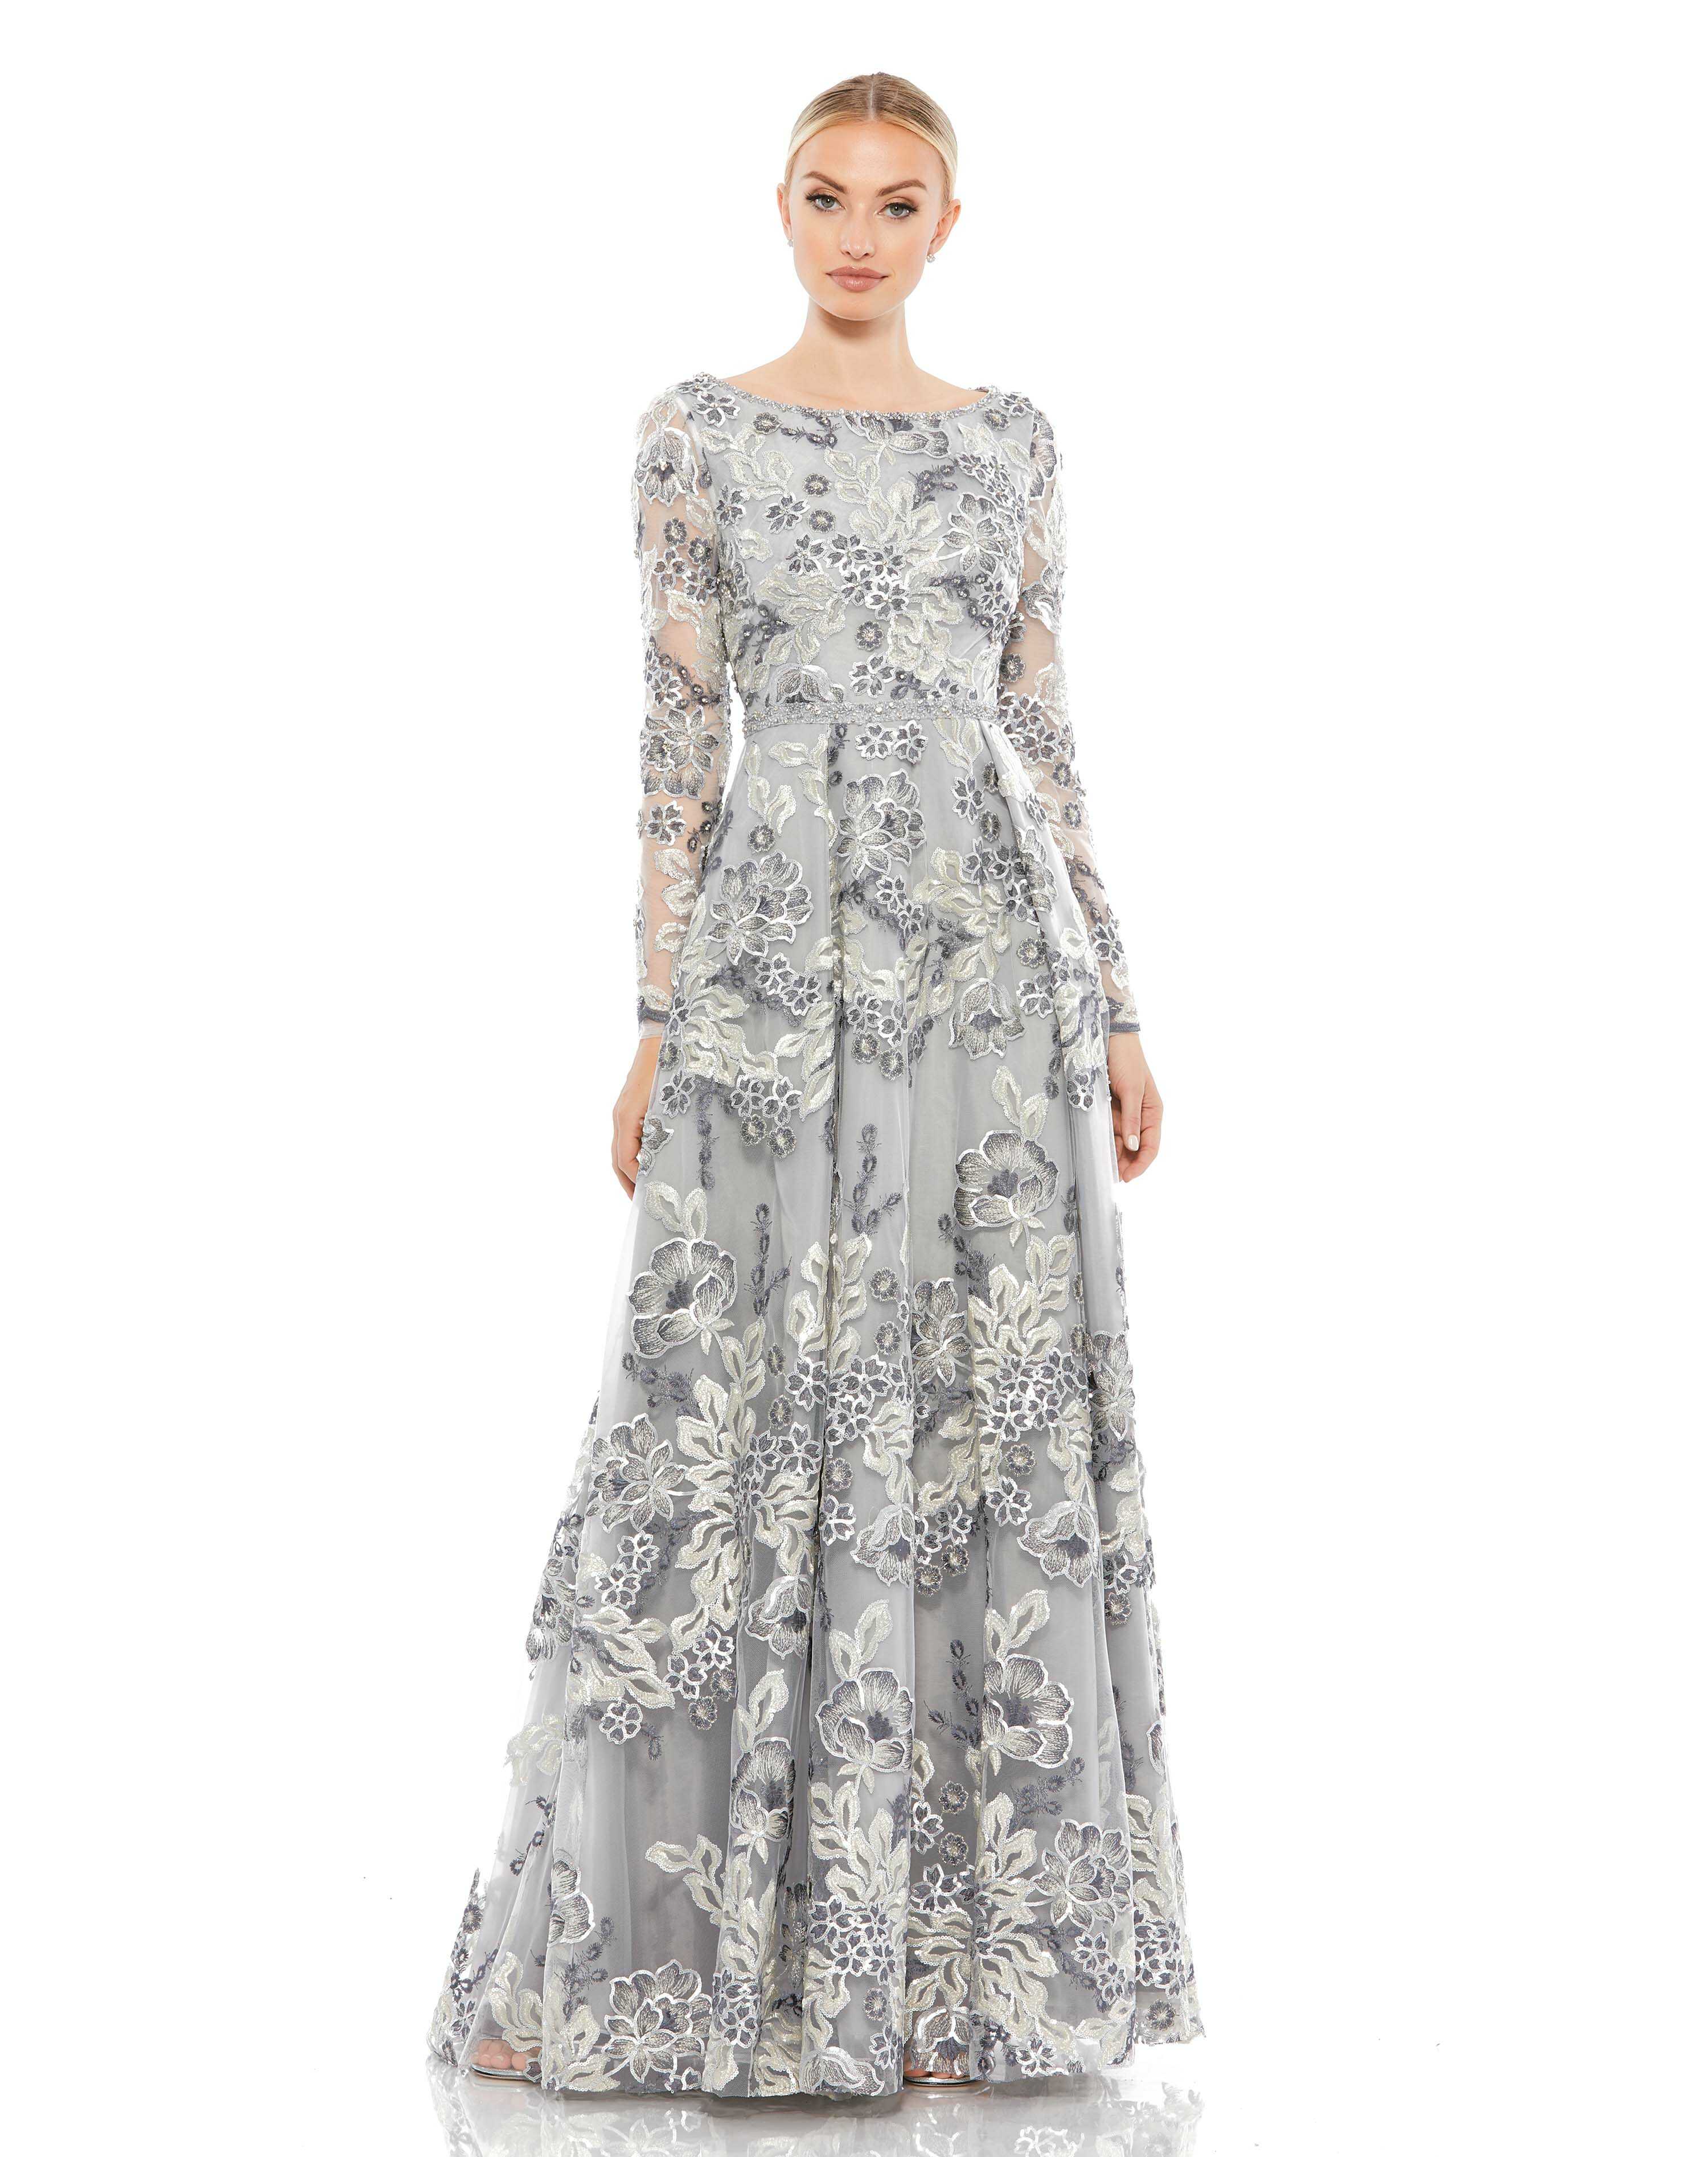 Floral Embellished Illusion Sleeve A-Line Gown